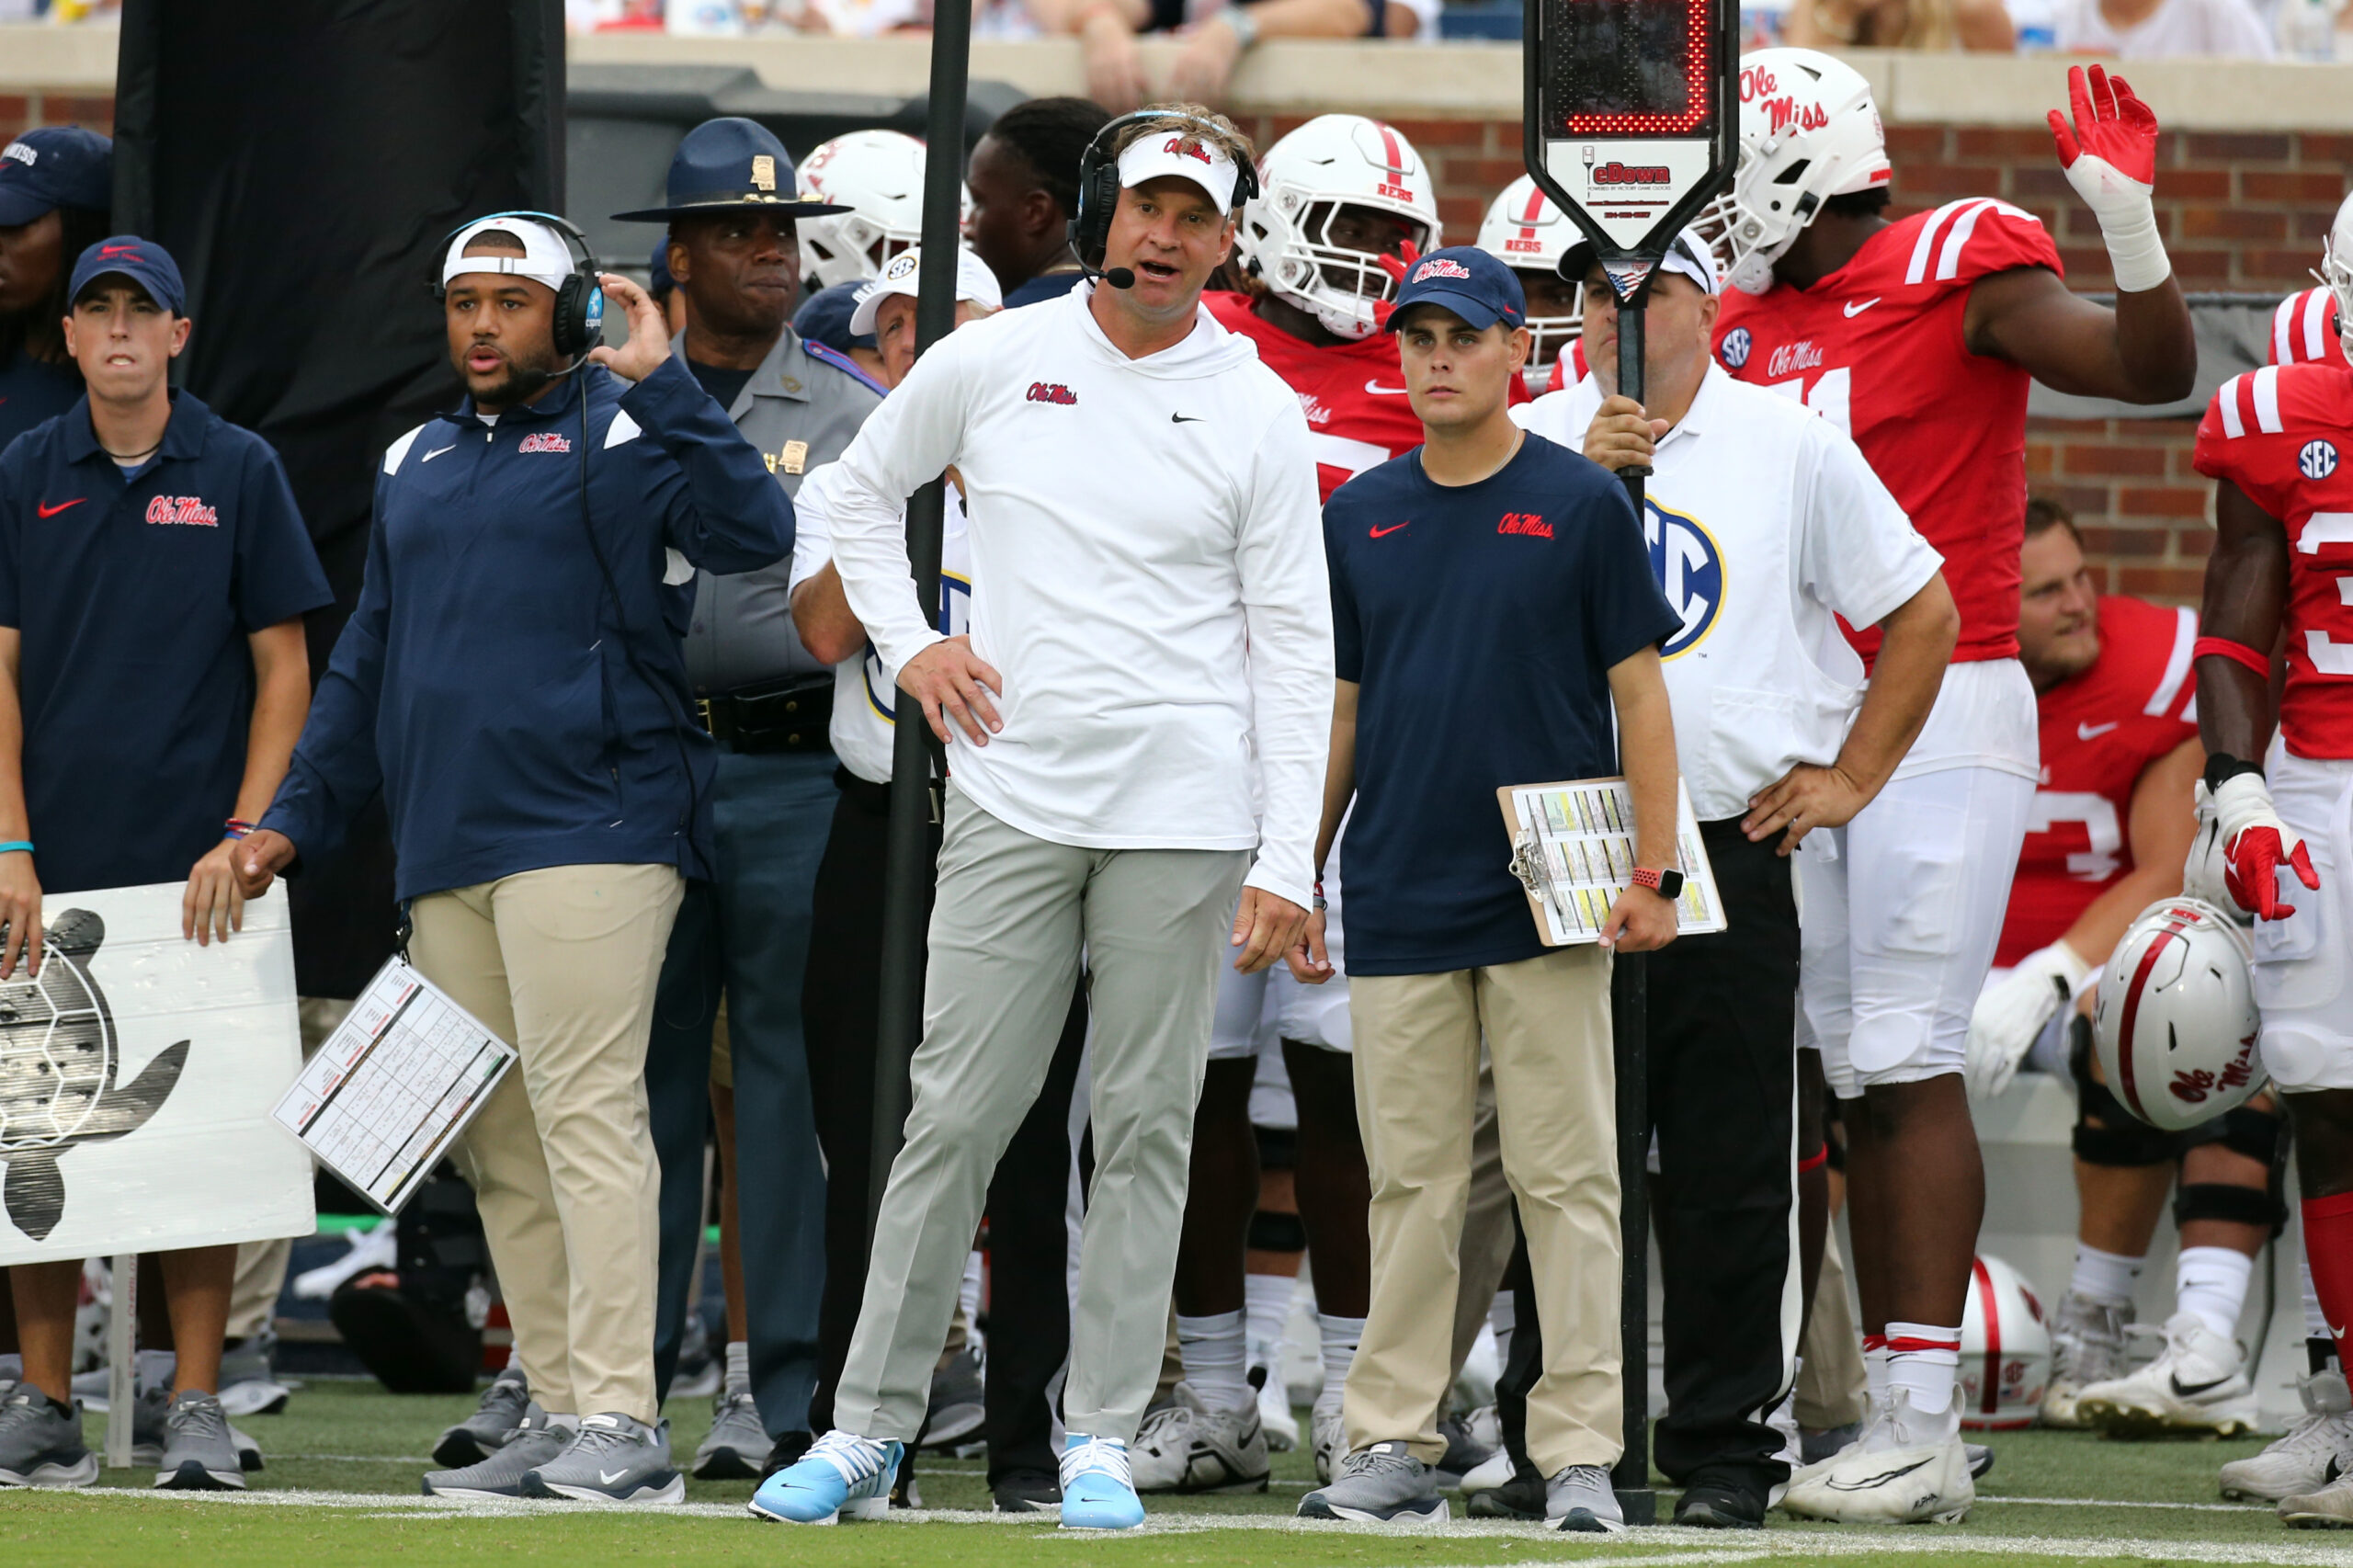 Hurricanes offensive coordinator named head coach at SMU